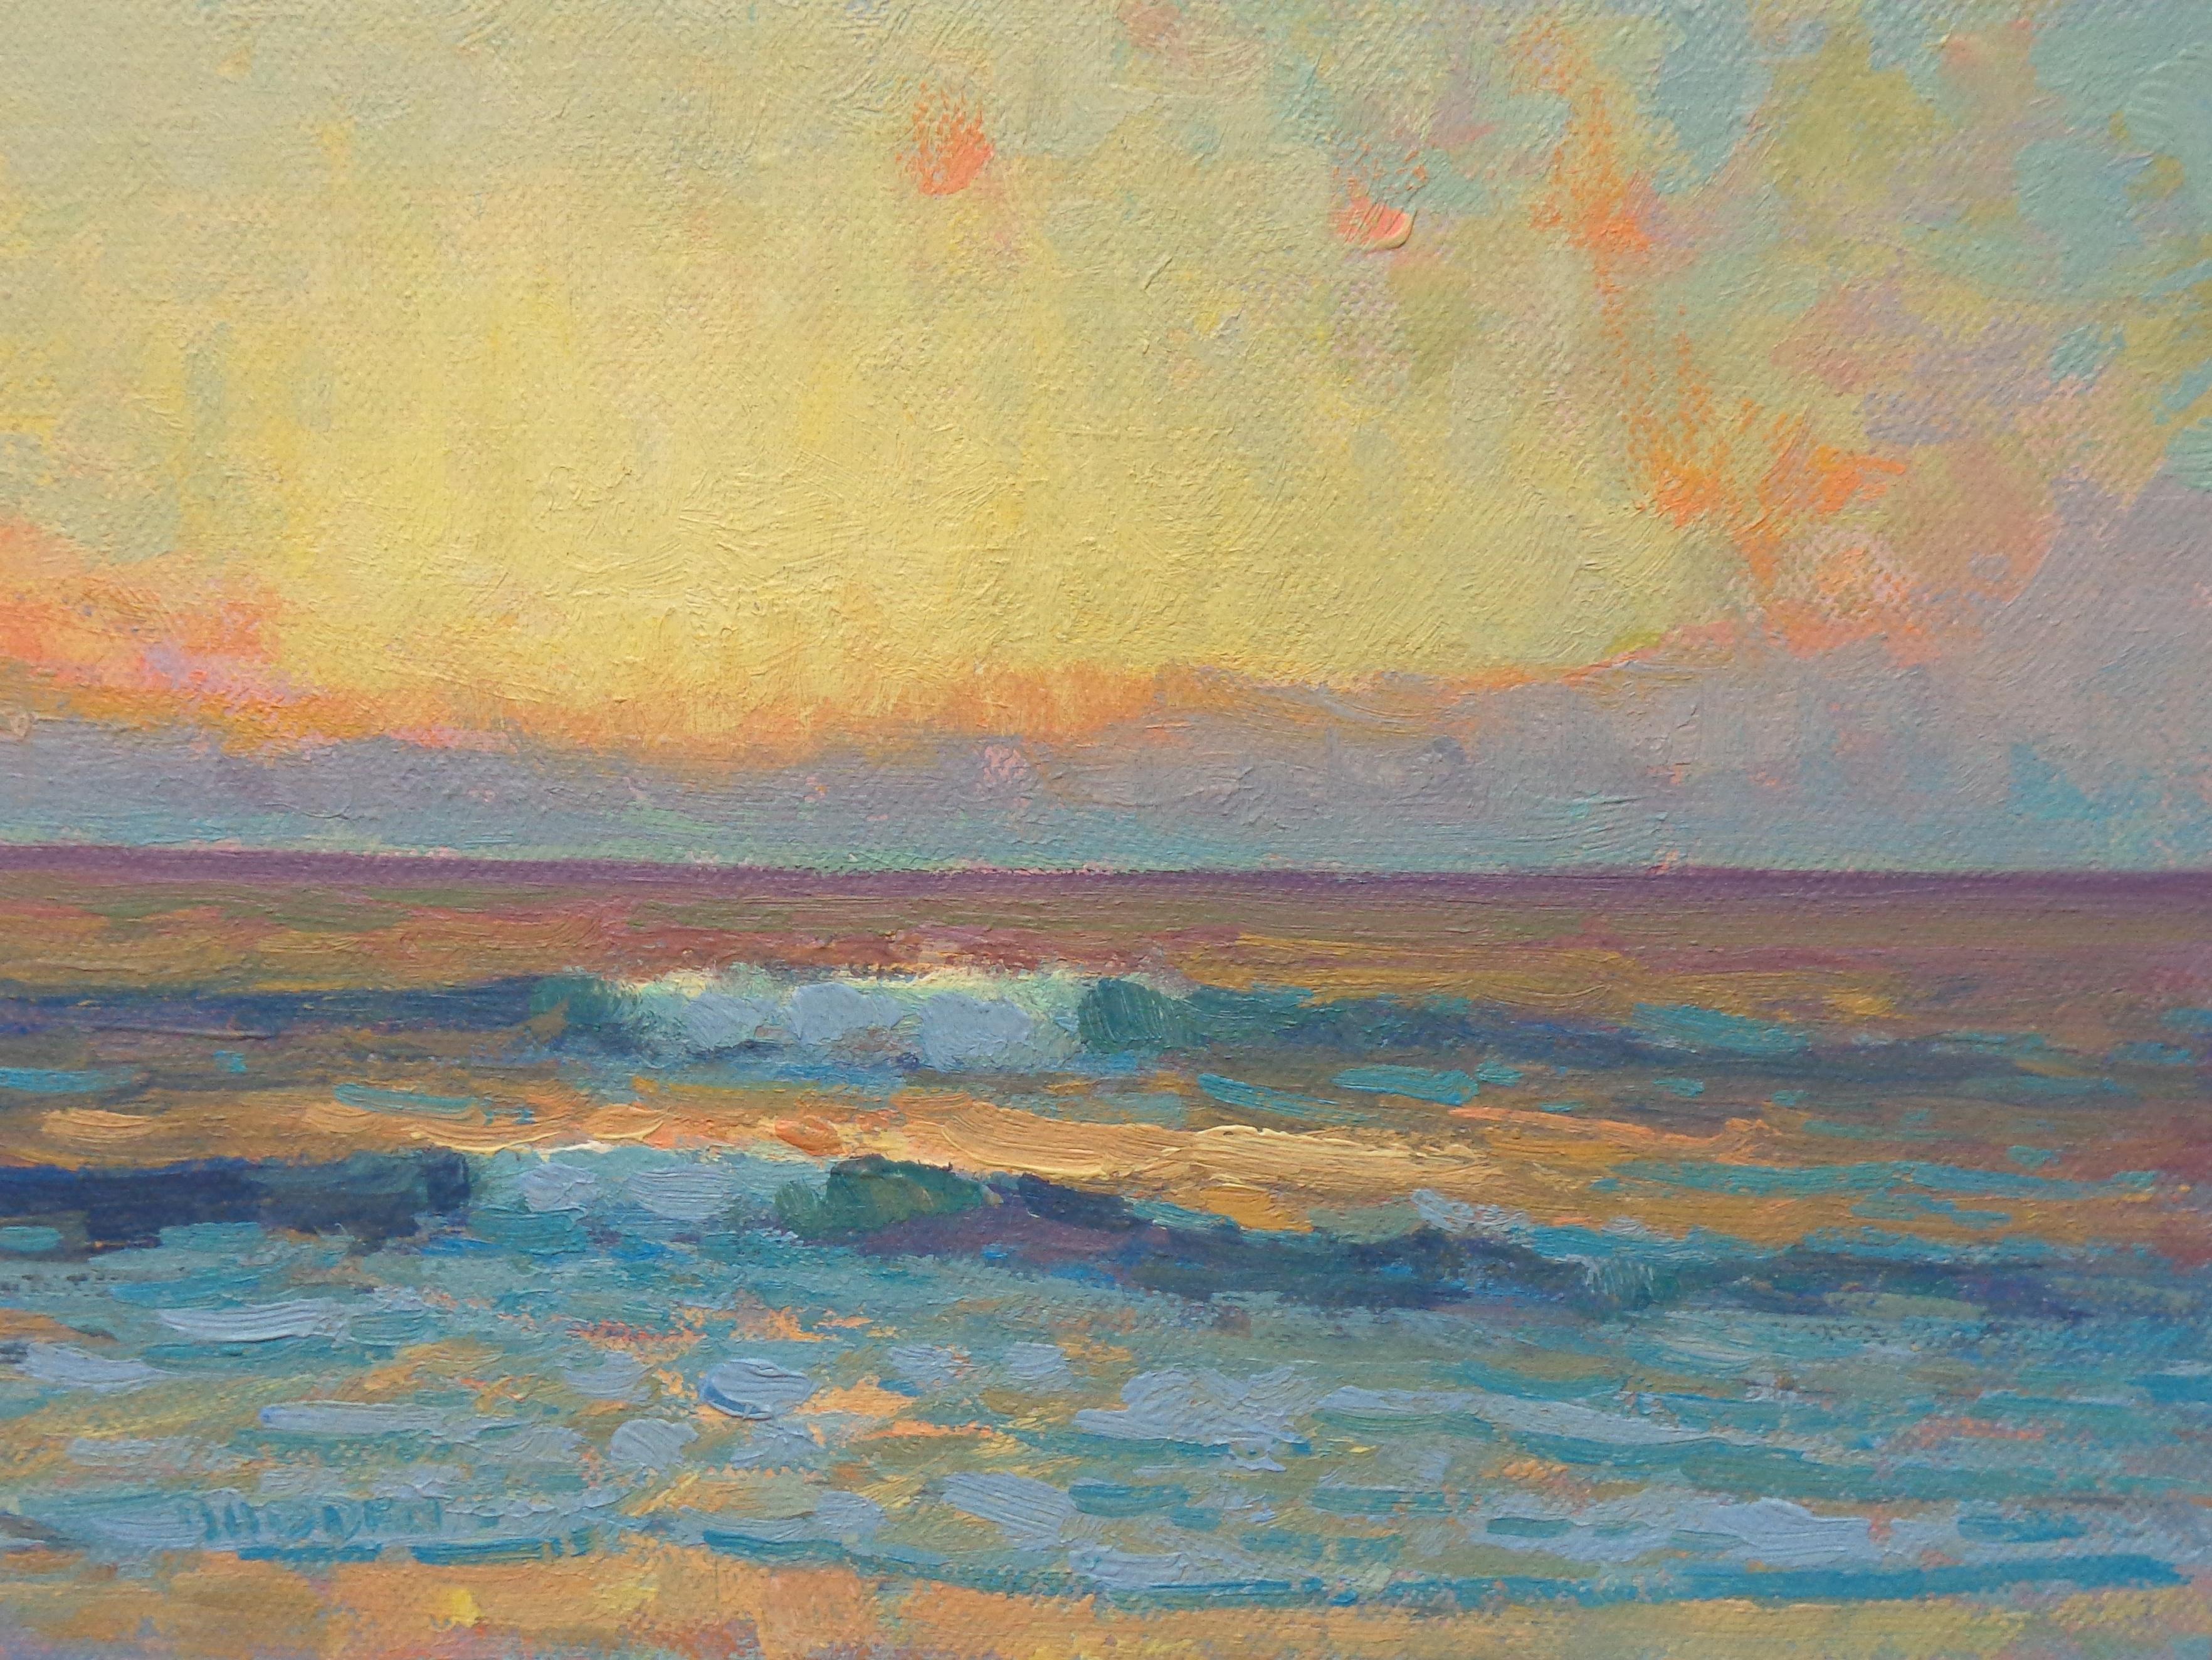 Ocean Beach Seascape Study Oil Painting  by Michael Budden Sunrise Series For Sale 1